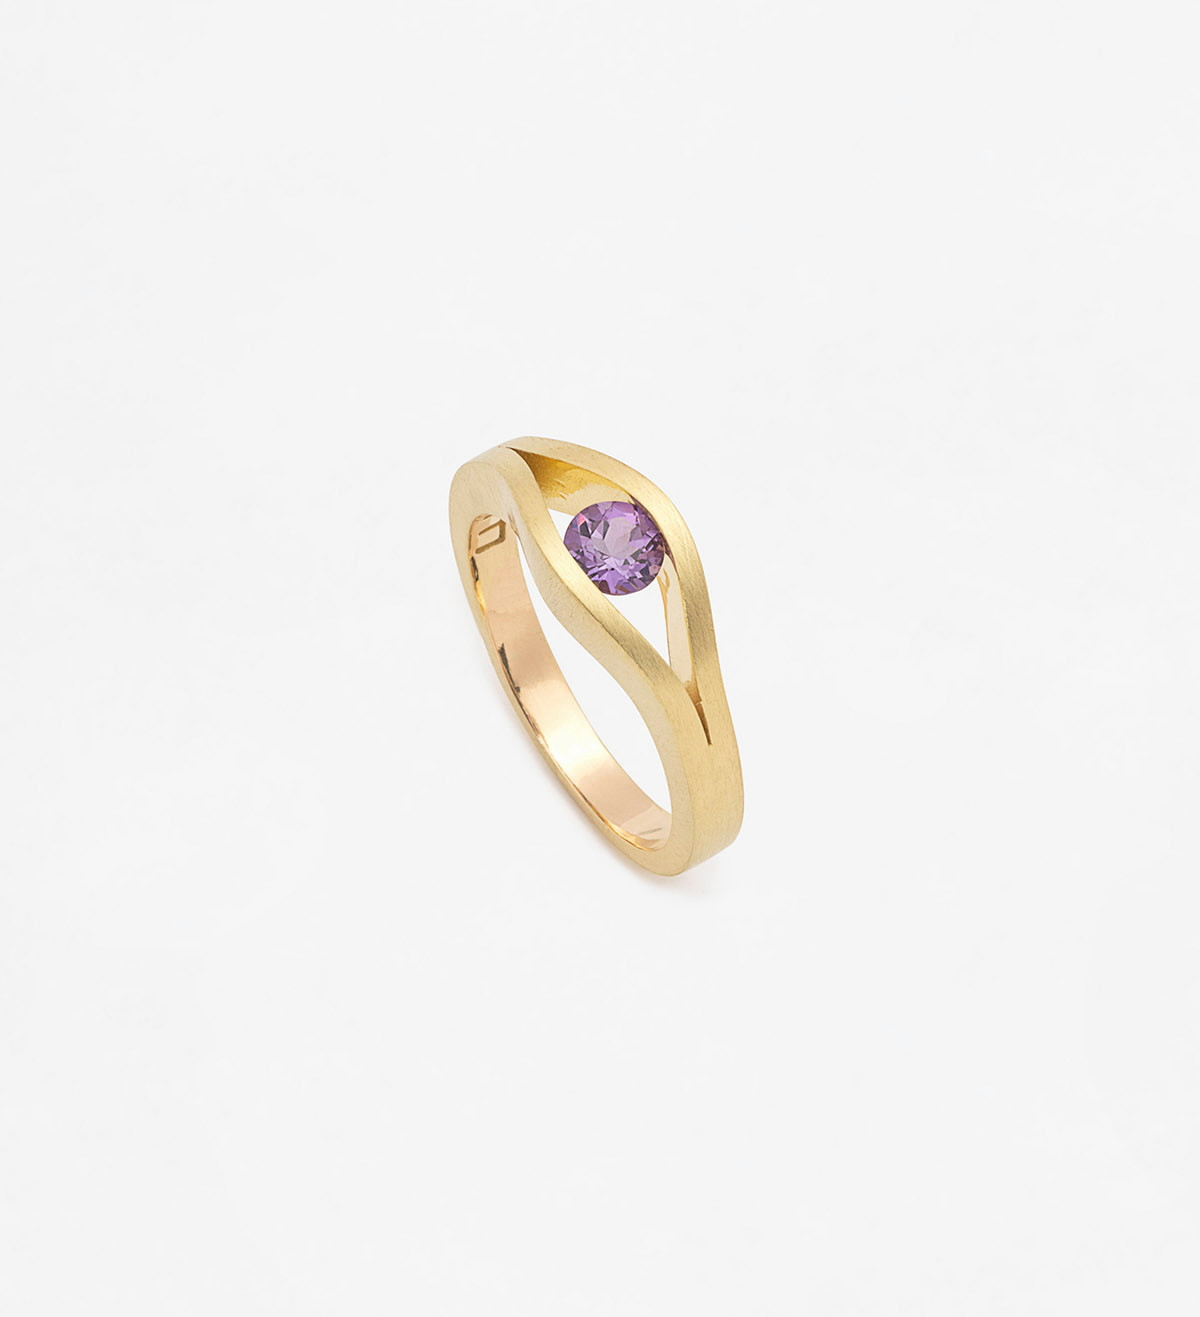 18k gold ring with lila sapphire Wennick-Lefèvre 0.54ct